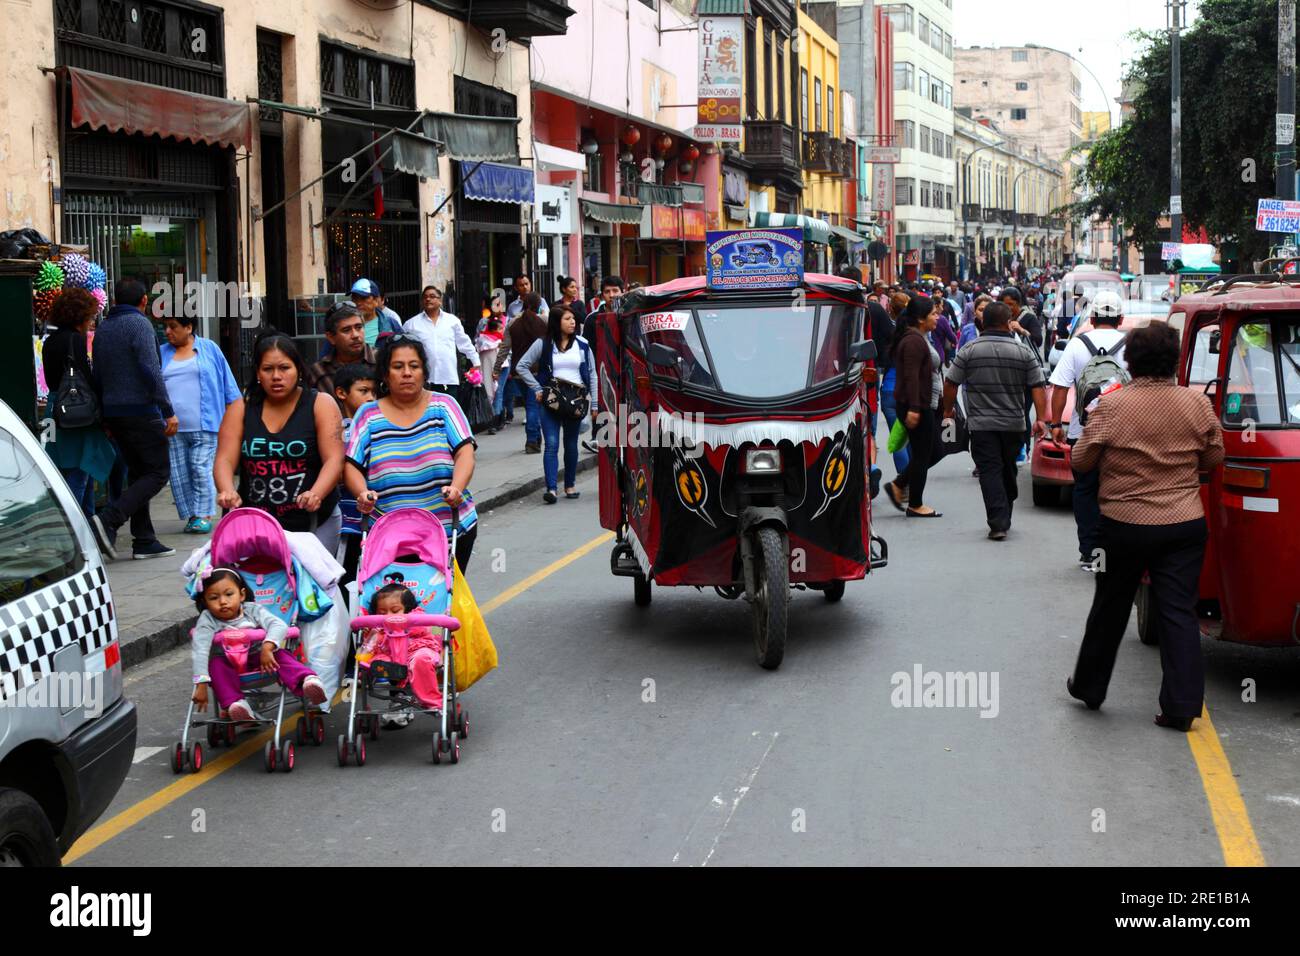 Women pushing girls in pushchairs and motorised tricycle taxi (mototaxi) in commercial market area of central Lima, Peru Stock Photo